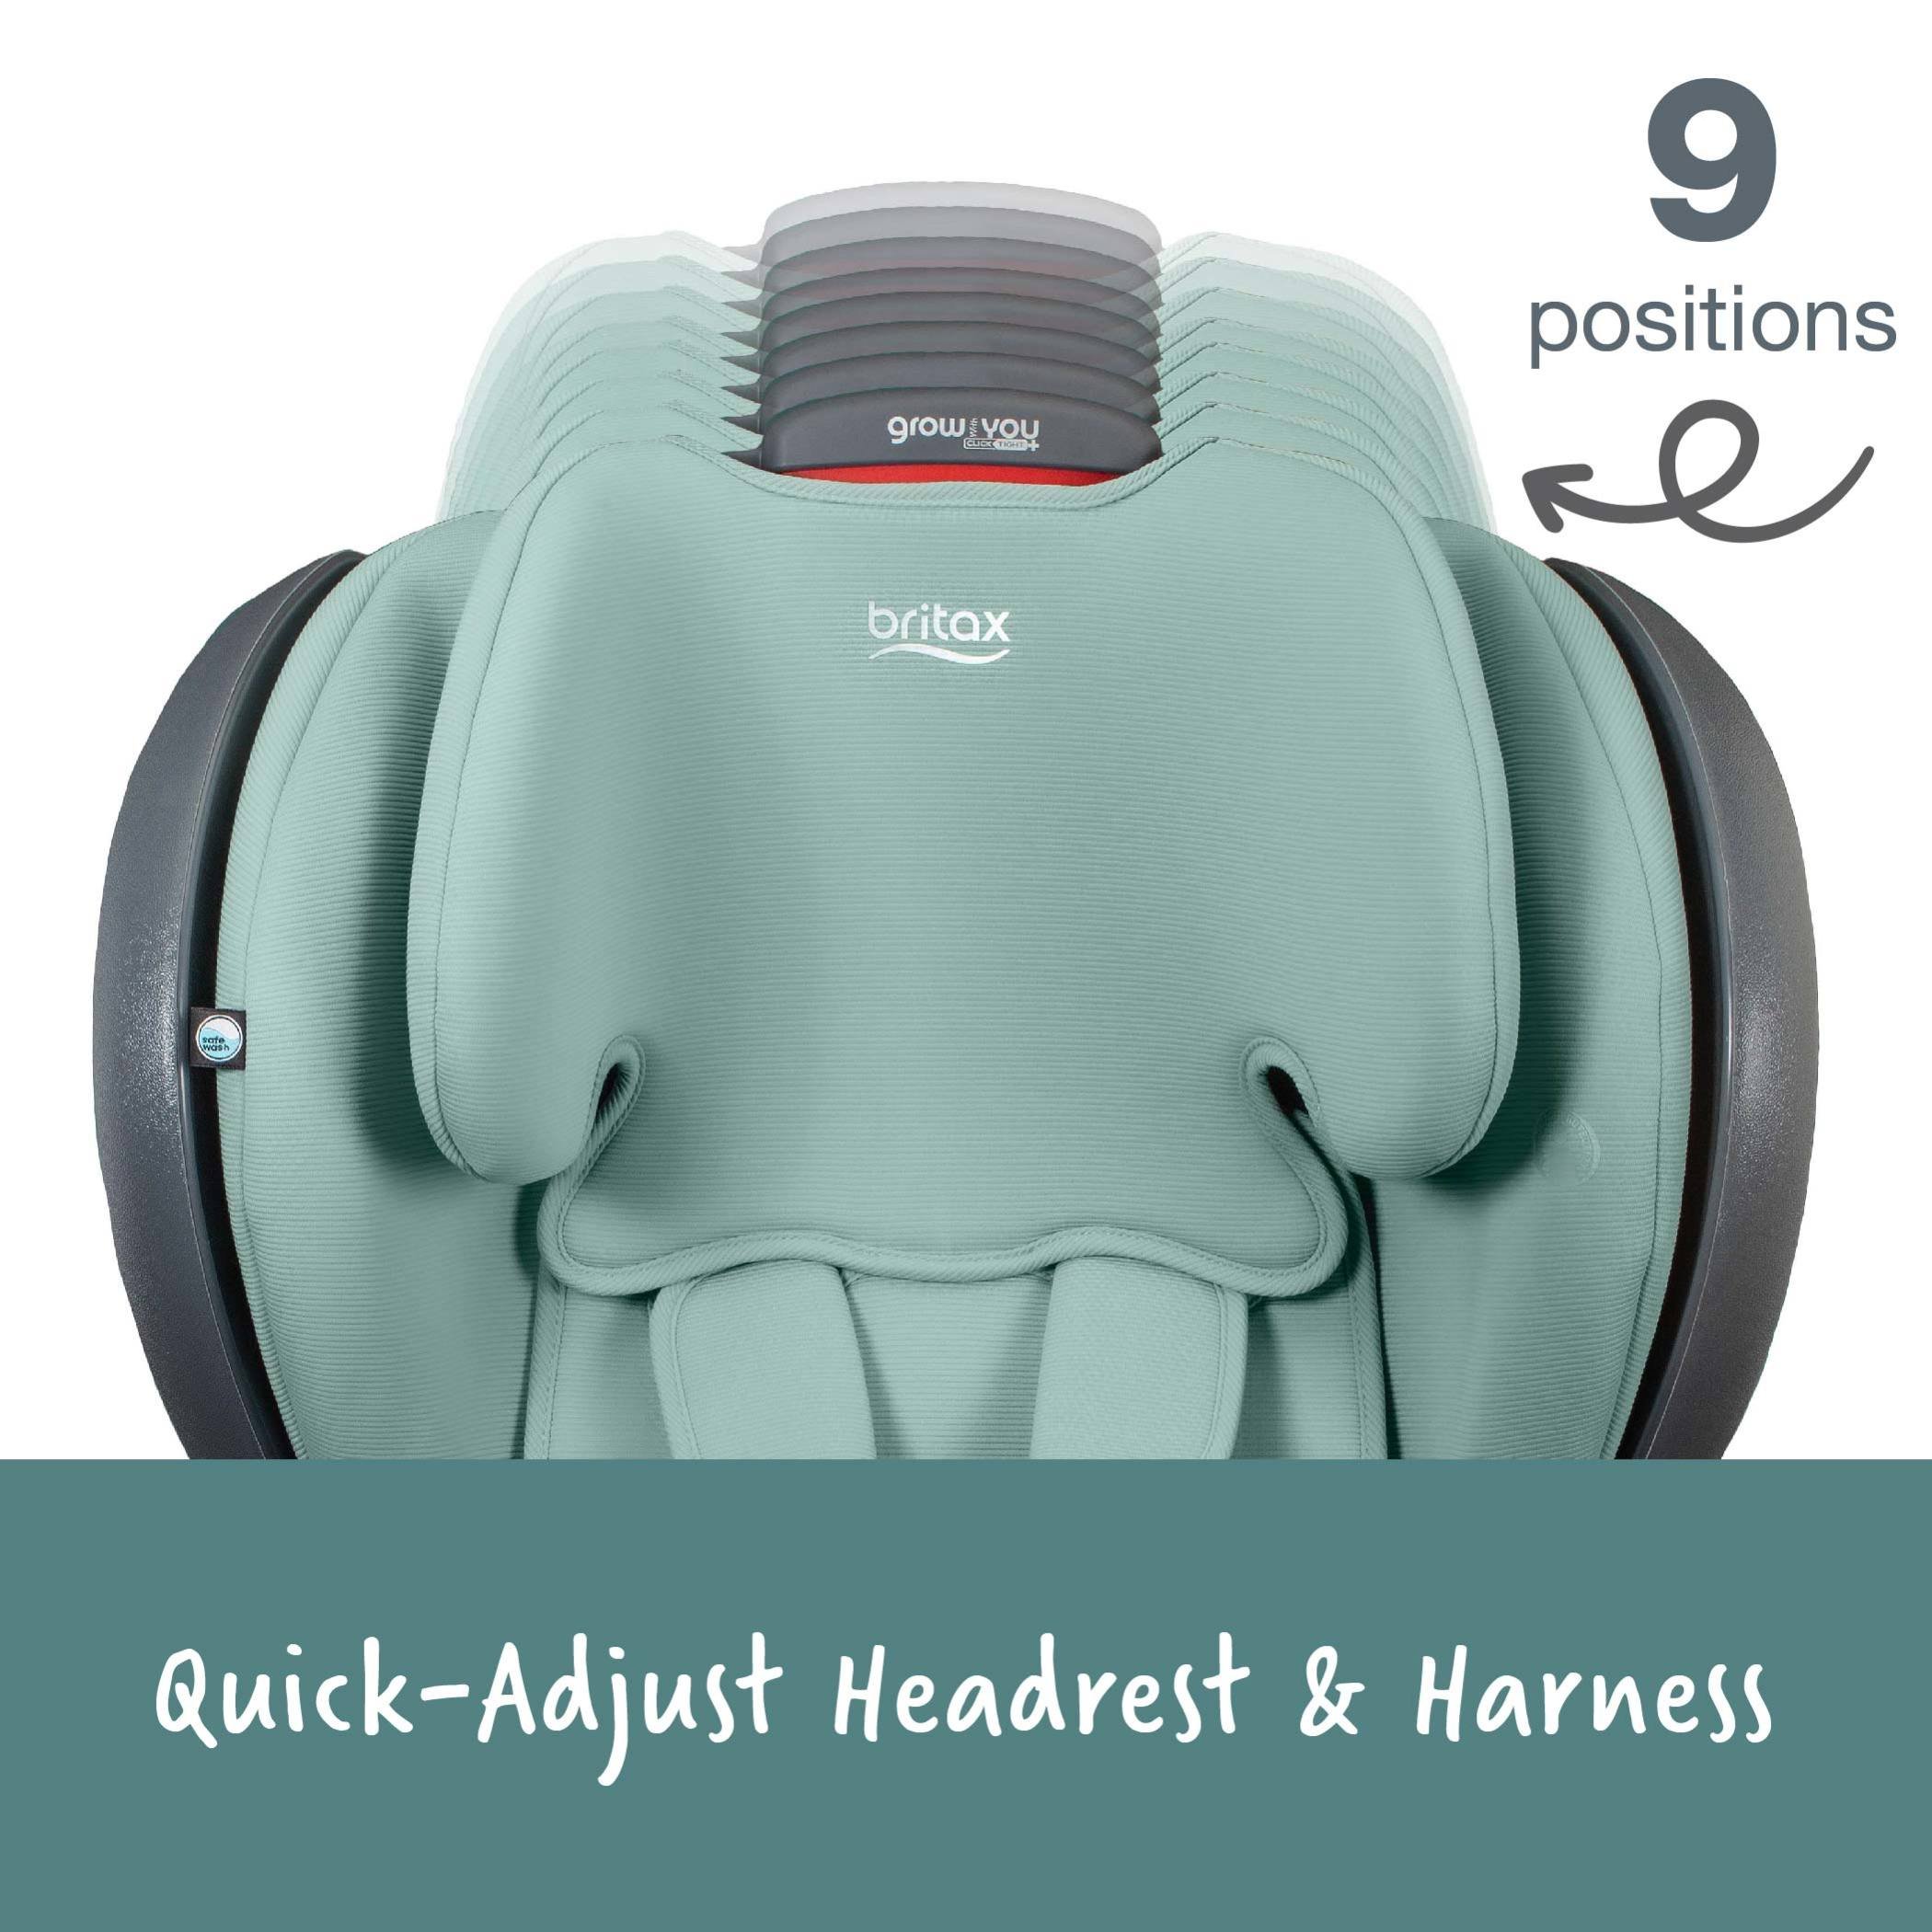 9 Position quick-adjust headrest shown on a green ombre grow with you clicktight+